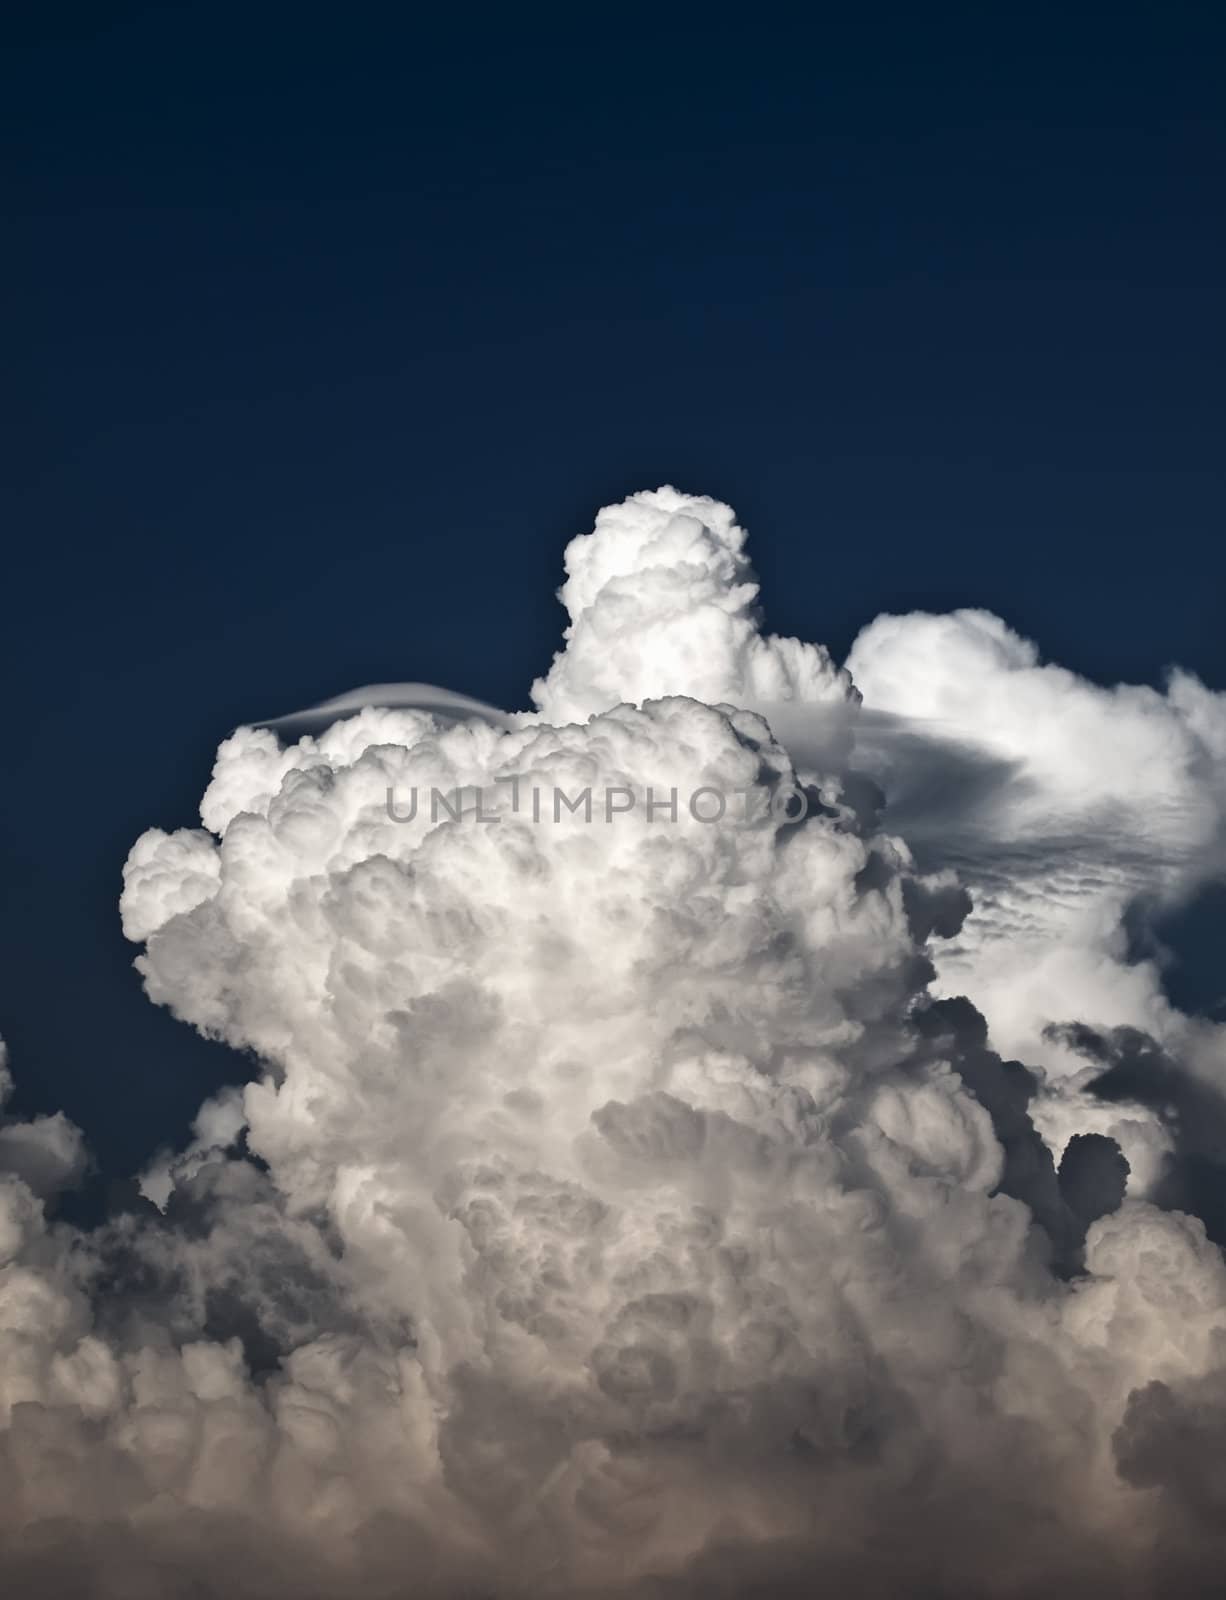 Towering detailed cumulus cloud with lenticular formations